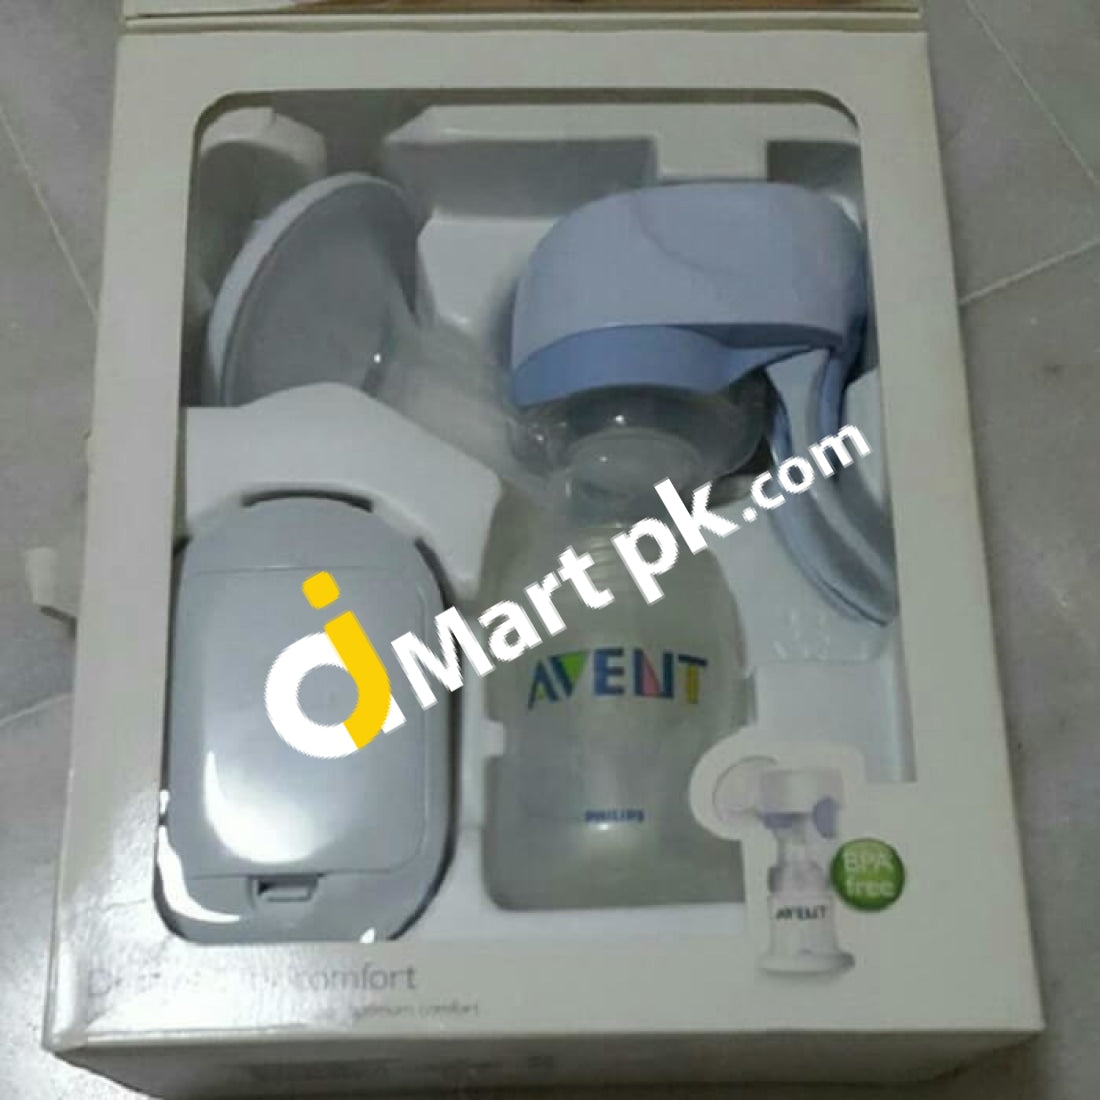 Philips Avent Isis Iq Uno Milk Pump With Free 2 Pads - Made In England Imported From Uk